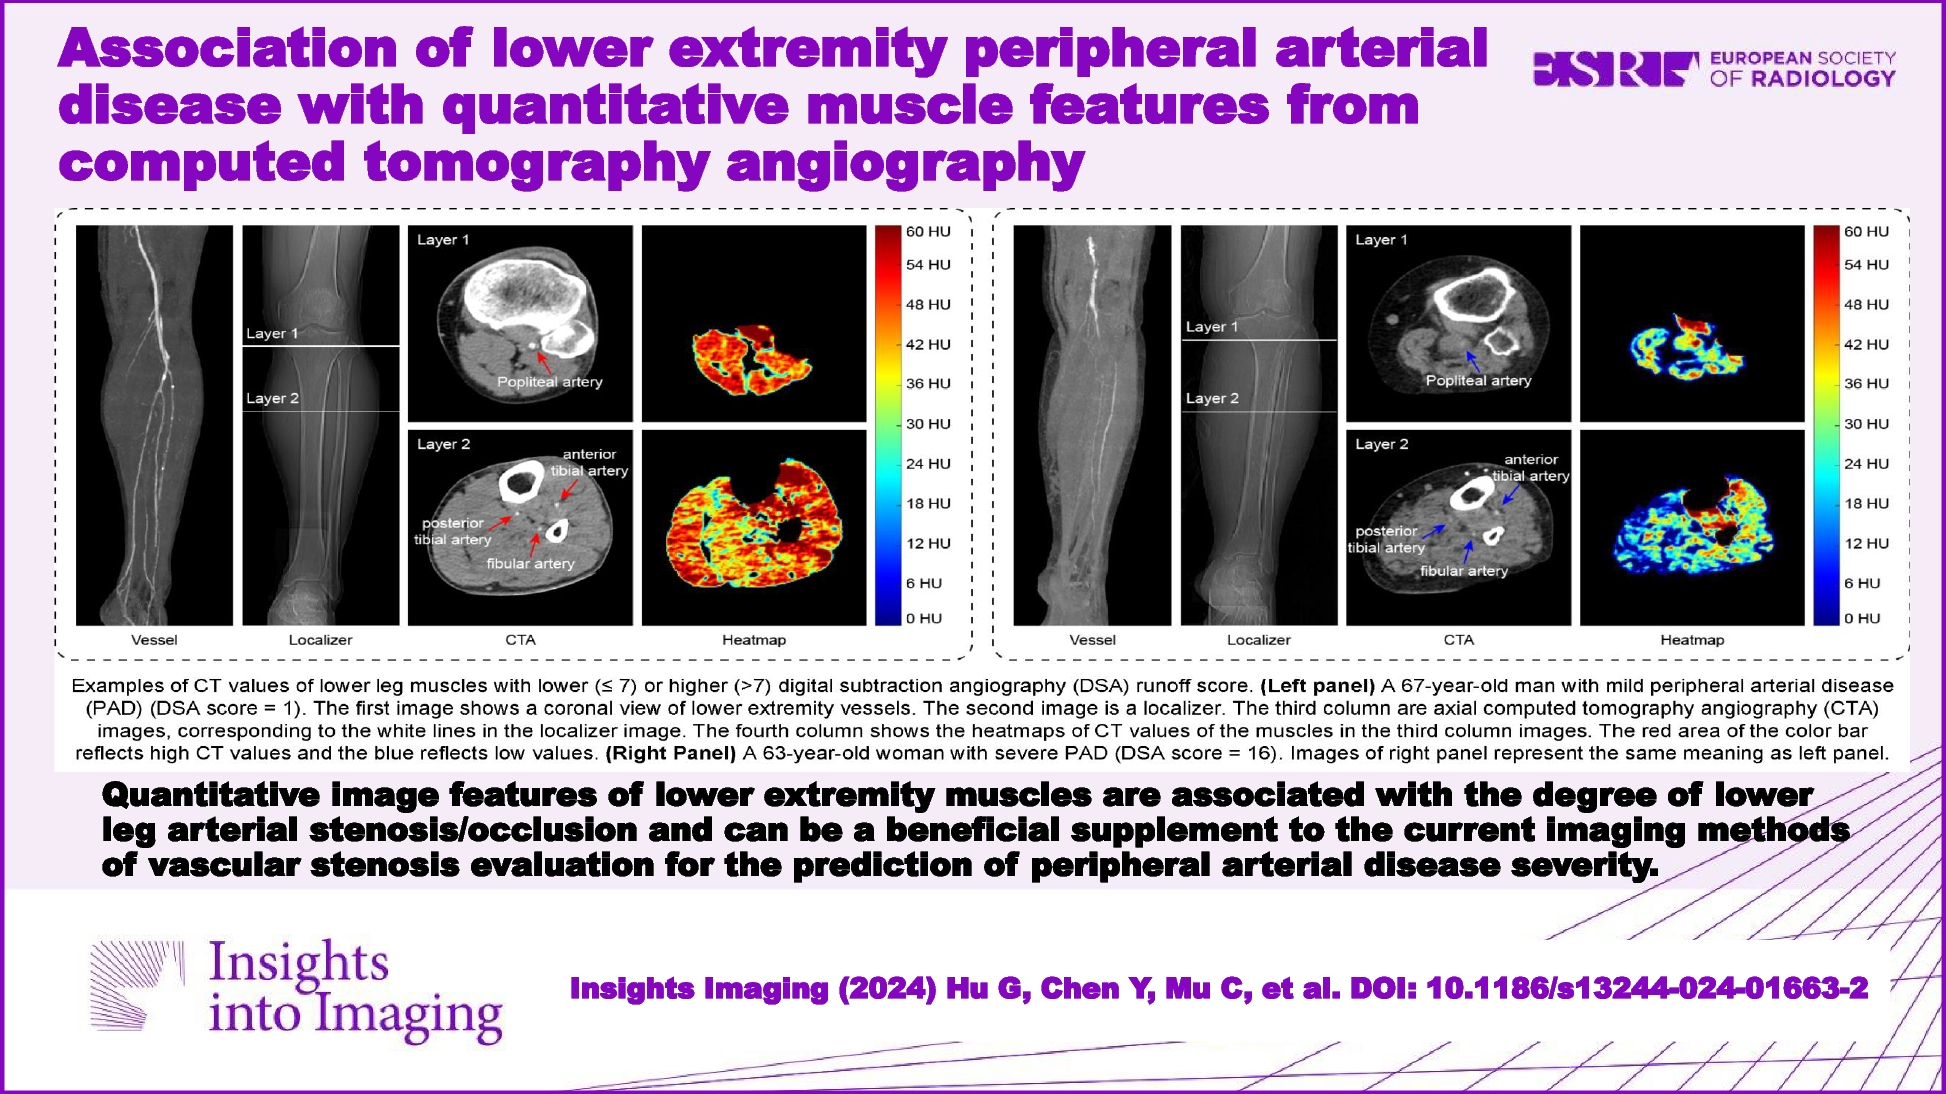 Association of lower extremity peripheral arterial disease with quantitative muscle features from computed tomography angiography